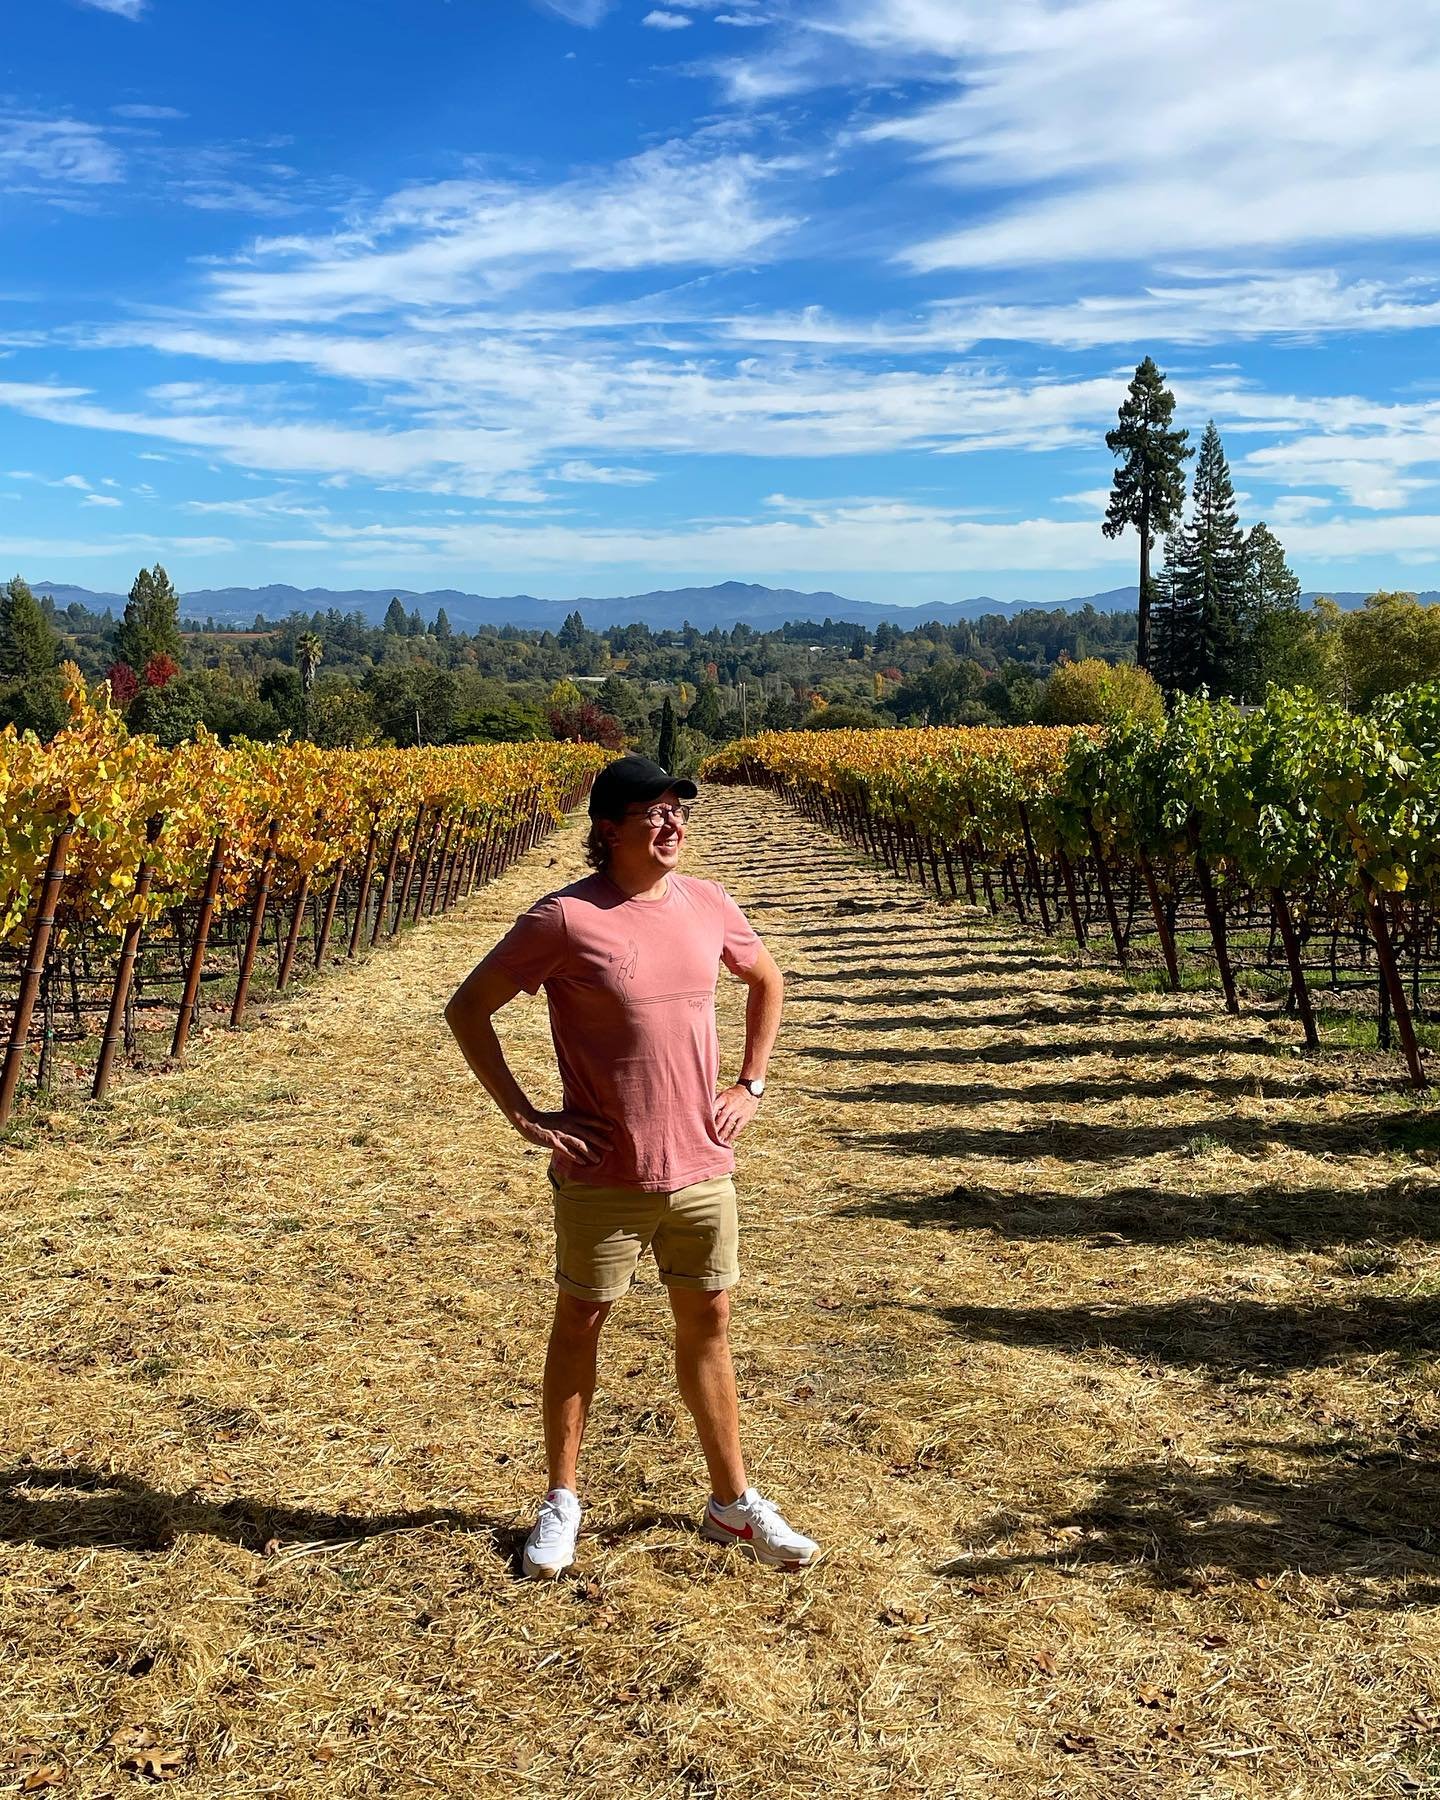 Just back from an amazing few weeks learning about Californian wine. 🇺🇸🍷
- For me there is no better way to learn about wine regions than to go and visit them, to see them yourself, to taste the grapes, meet the winemakers, see the wineries and to